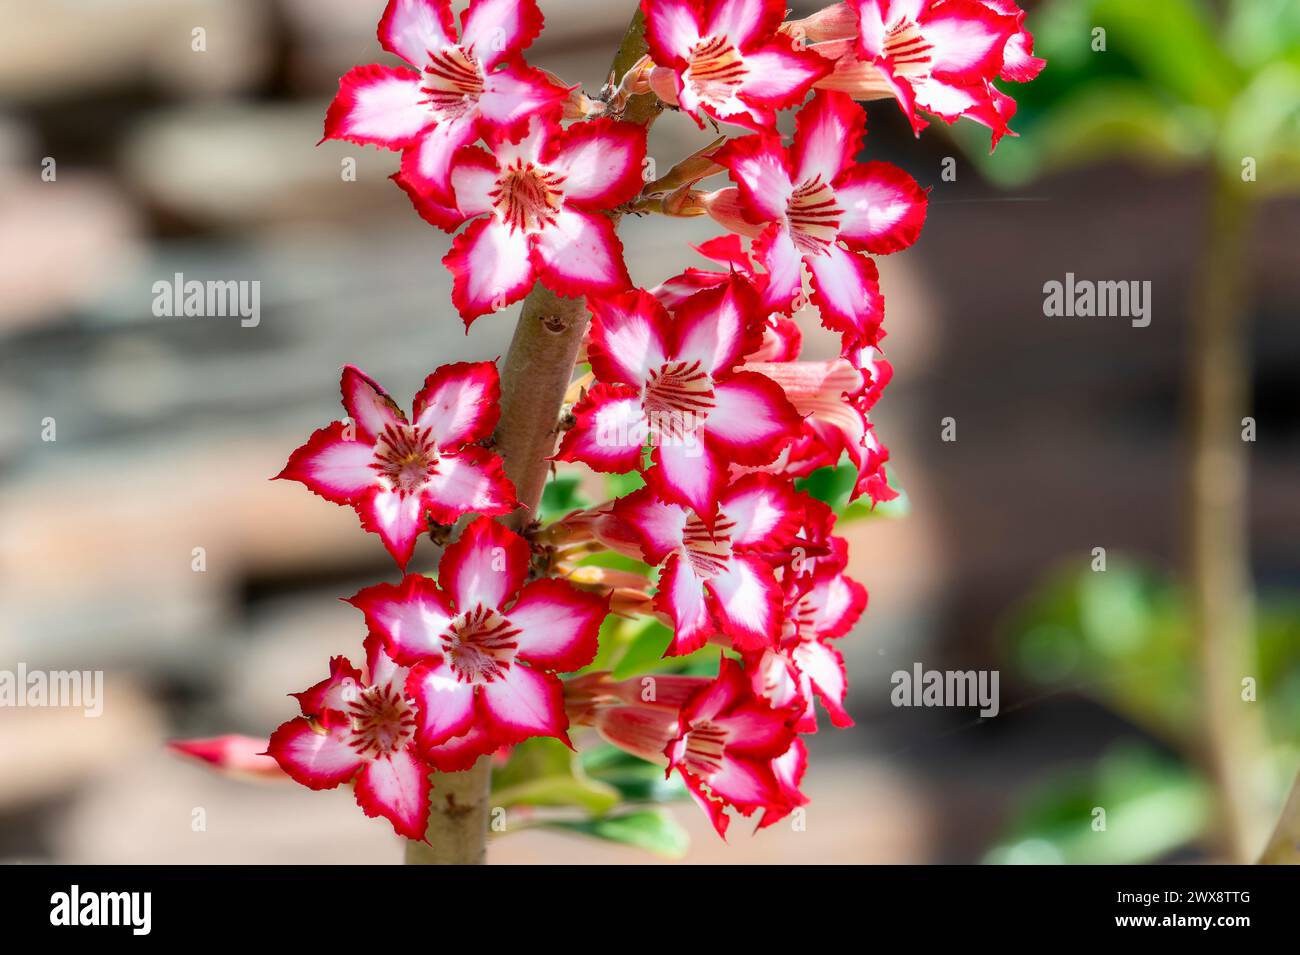 This close-up shot showcases the vibrant red and white petals of an Impala Lily flower. The intricate patterns and textures of the flower are clearly Stock Photo